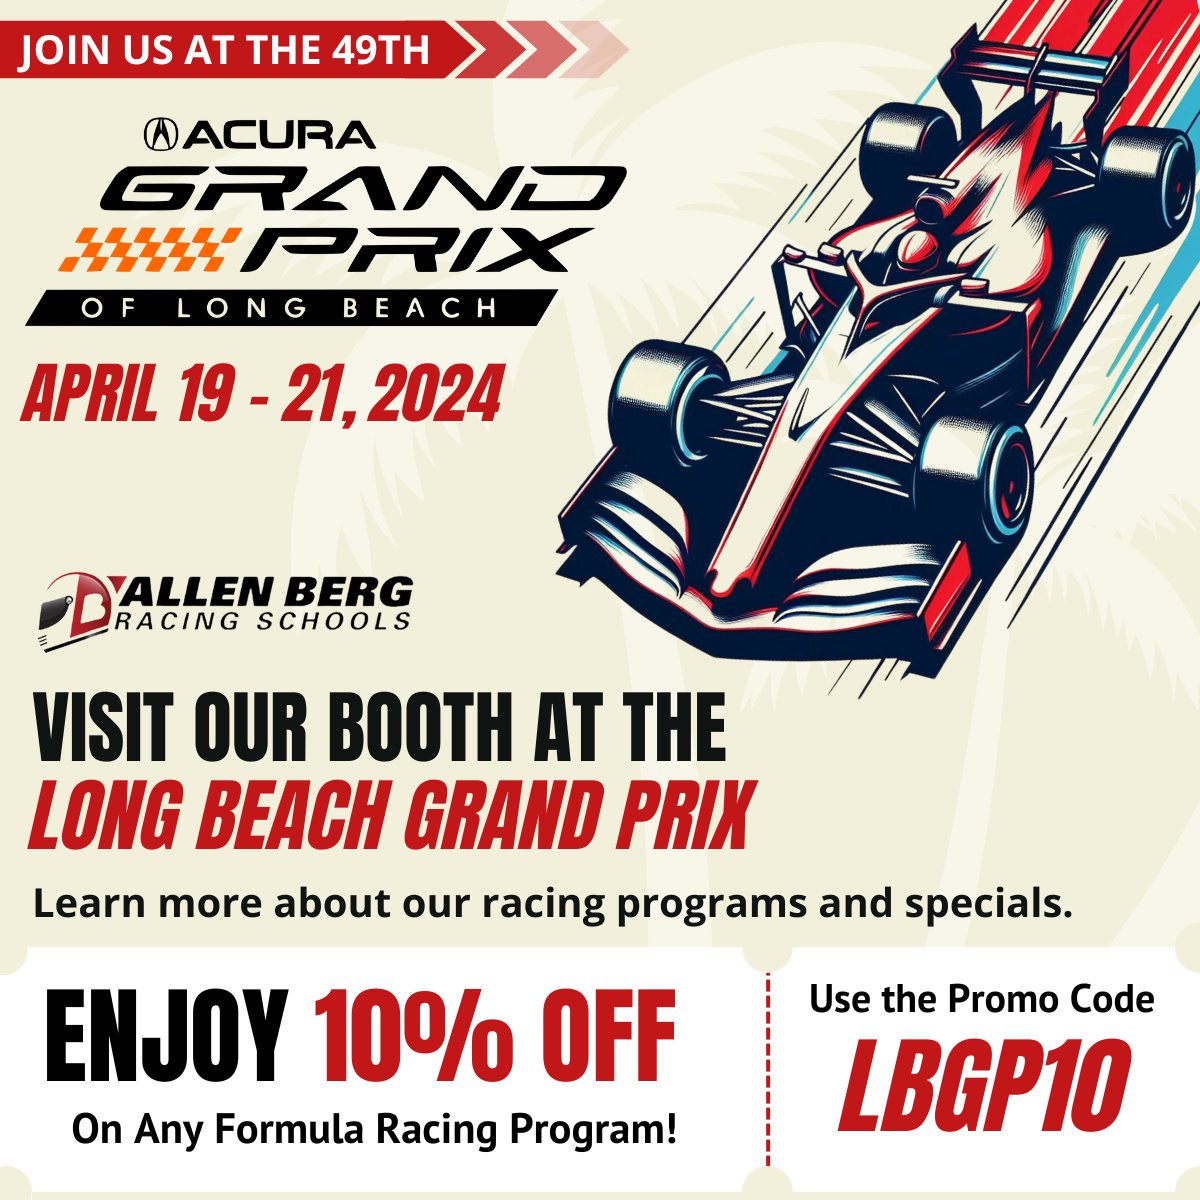 🏎️🏁 It's the final day of the Long Beach Grand Prix, but the fun isn't over yet! Allen Berg Racing Schools is still here, offering a 10% discount on all formula racing programs. Swing by our booth today and use promo code LBGP10 to take advantage of this exclusive offer.